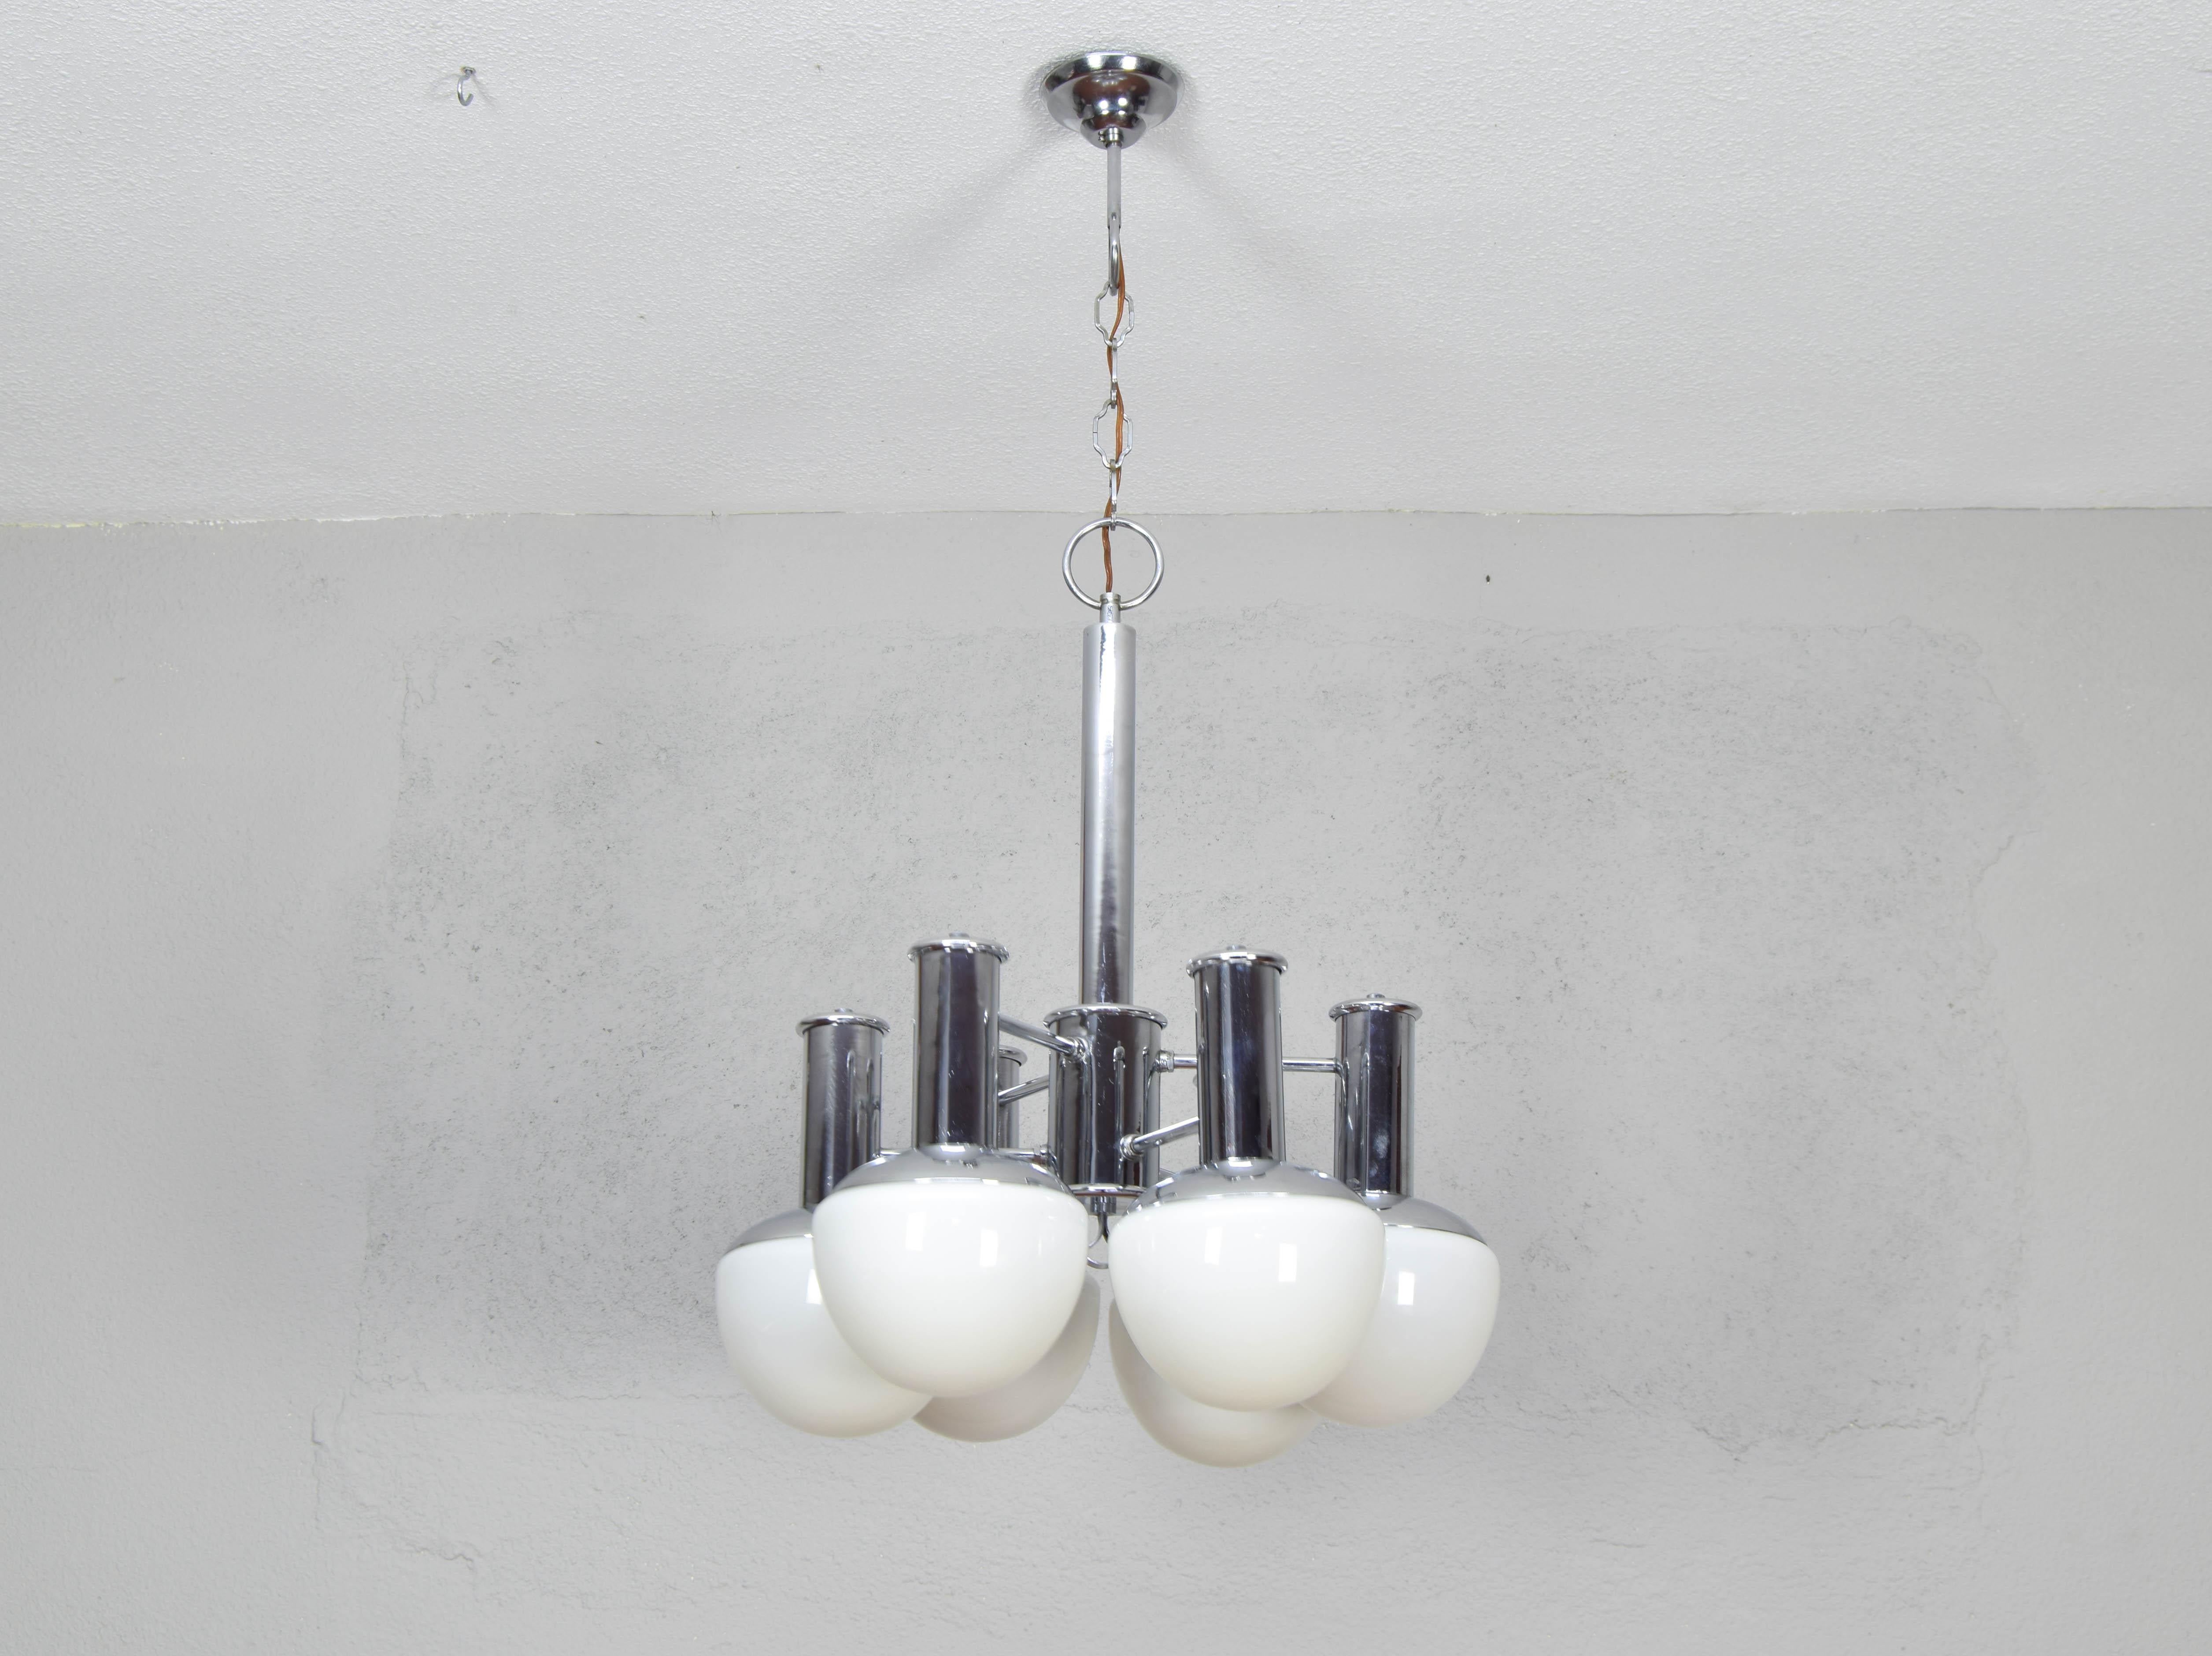 Large Italian chandelier made with a chromed steel structure and six light points with semicircular opal glass lampshades.

As can be seen in the images, the structure is preserved in good vintage condition.
As for the tulips, it retains the 6